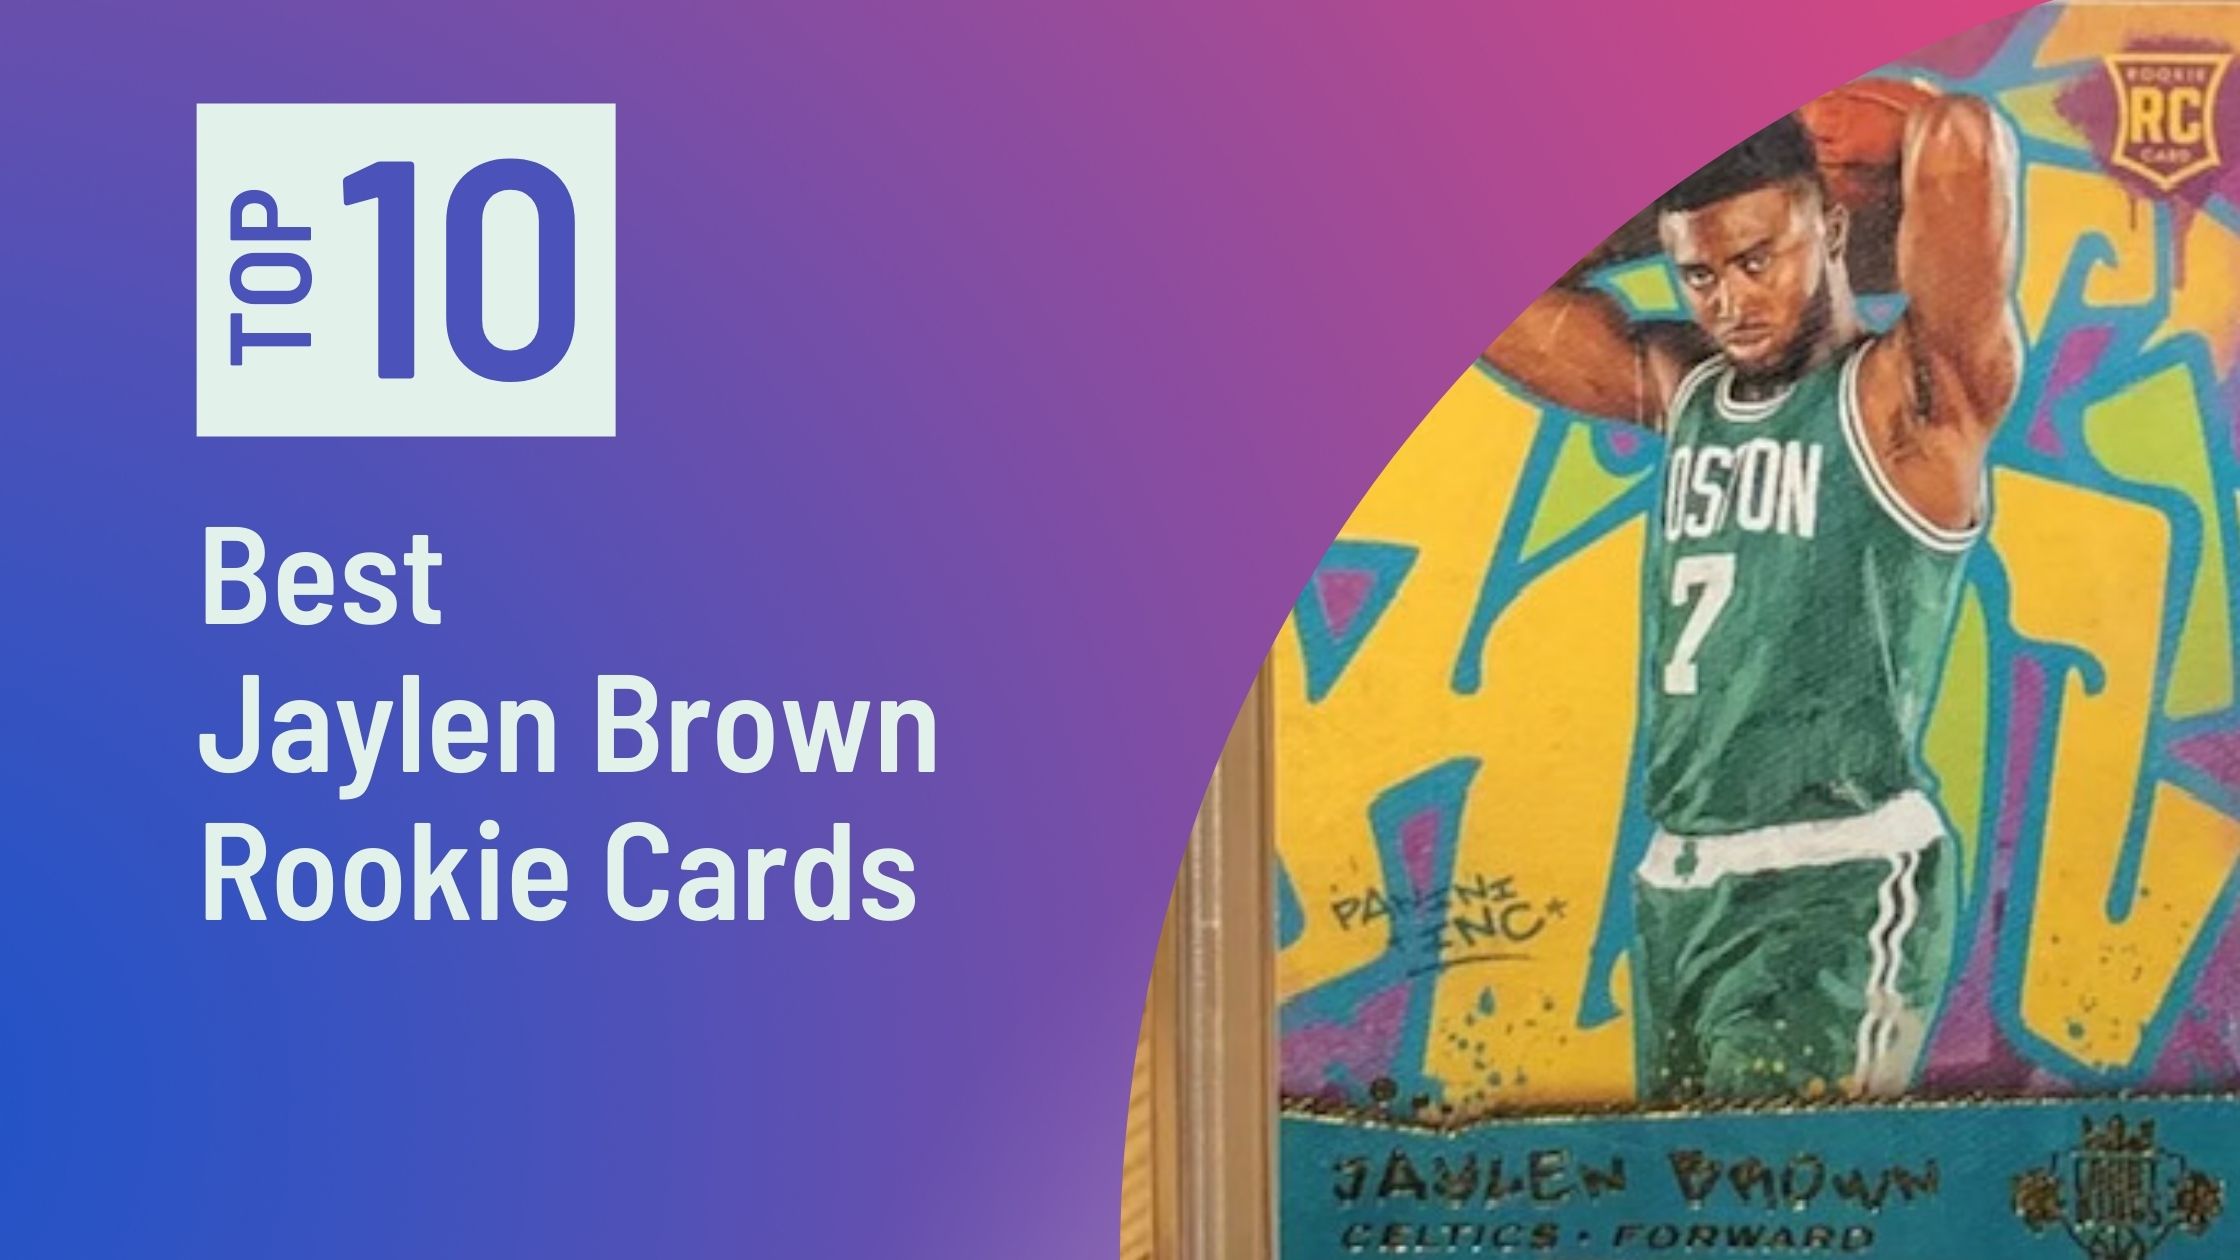 Featured Image for the Best Jaylen Brown Rookie Cards Blog Post